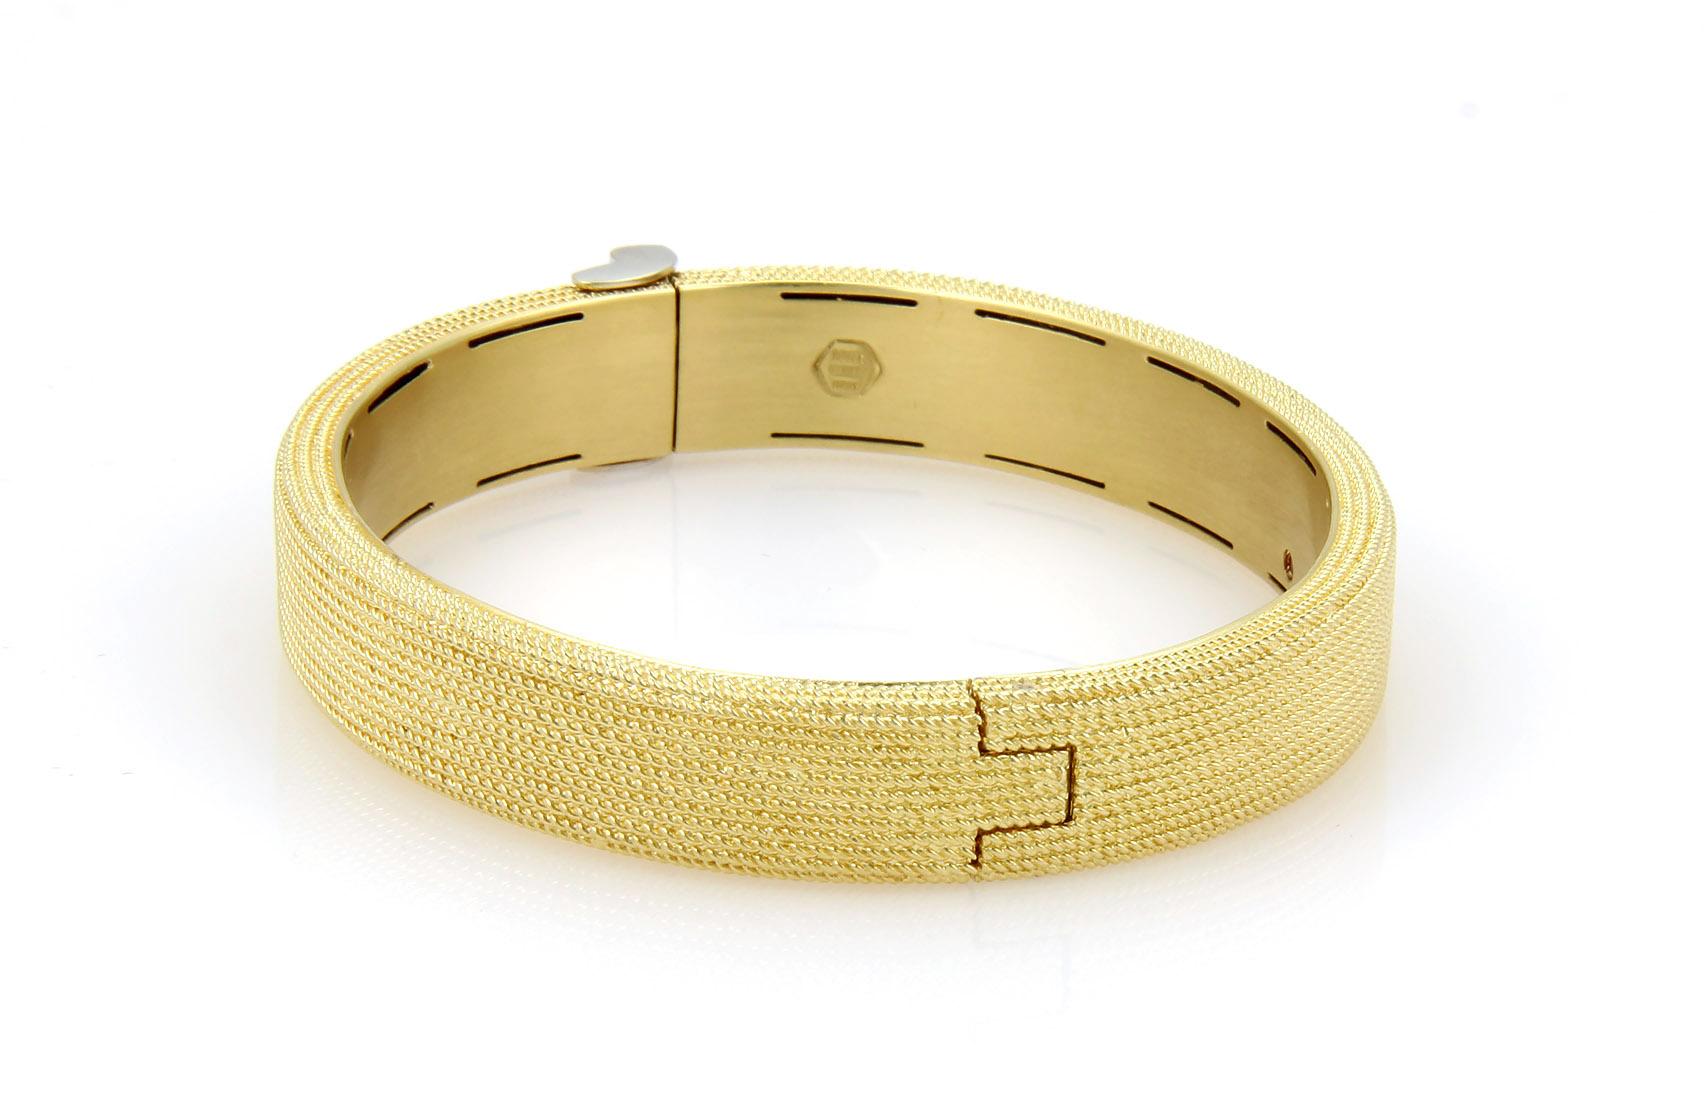 Roberto Coin 18k Two Tone Gold Diamond Wide Textured Bangle Bracelet In Excellent Condition For Sale In Boca Raton, FL